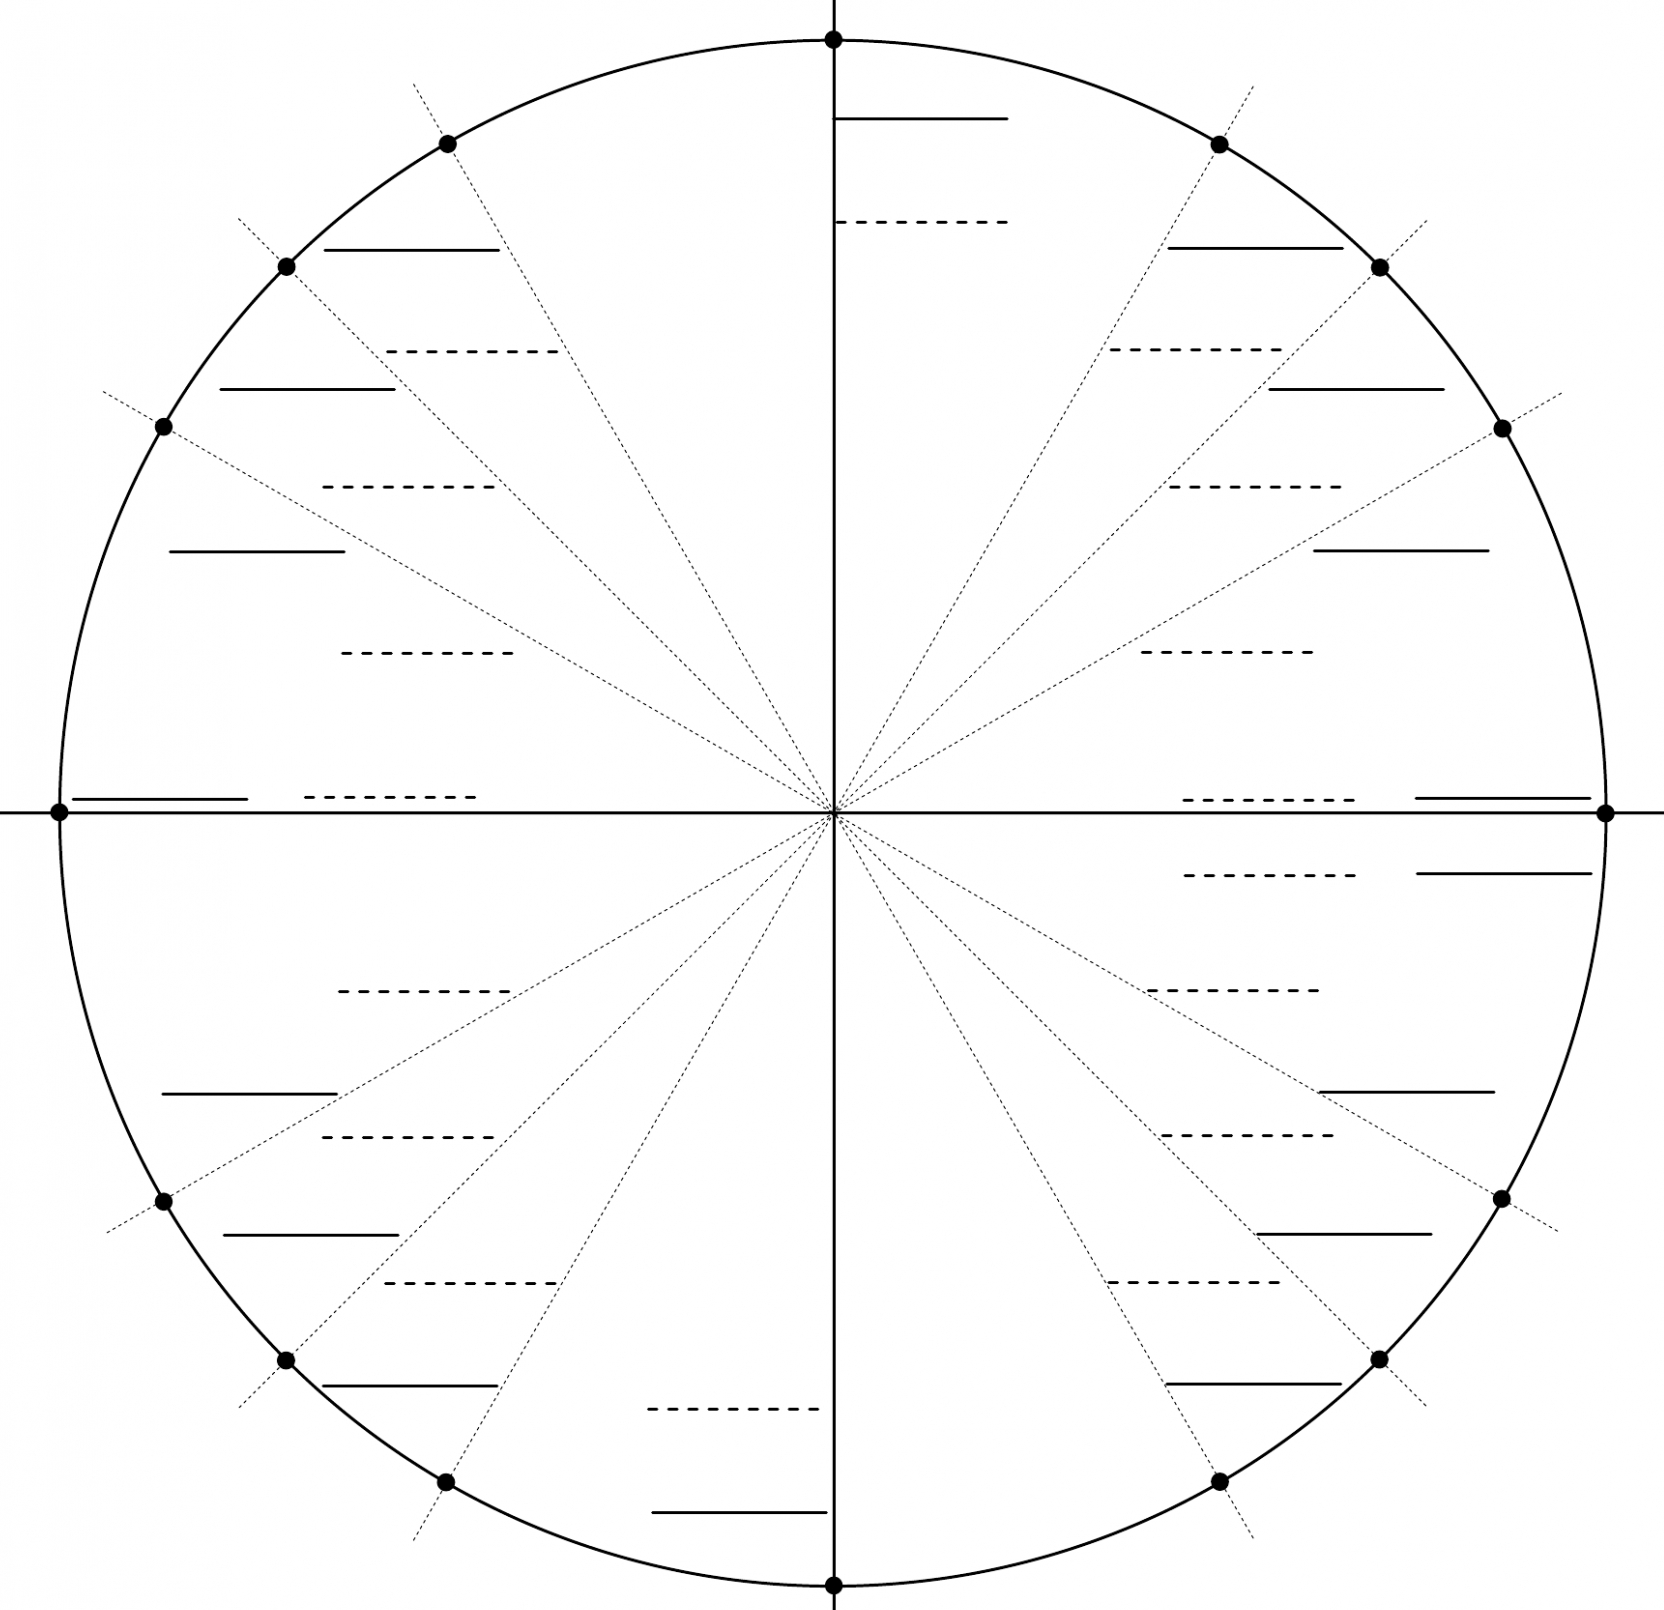 fill-in-the-unit-circle-worksheet-db-excel